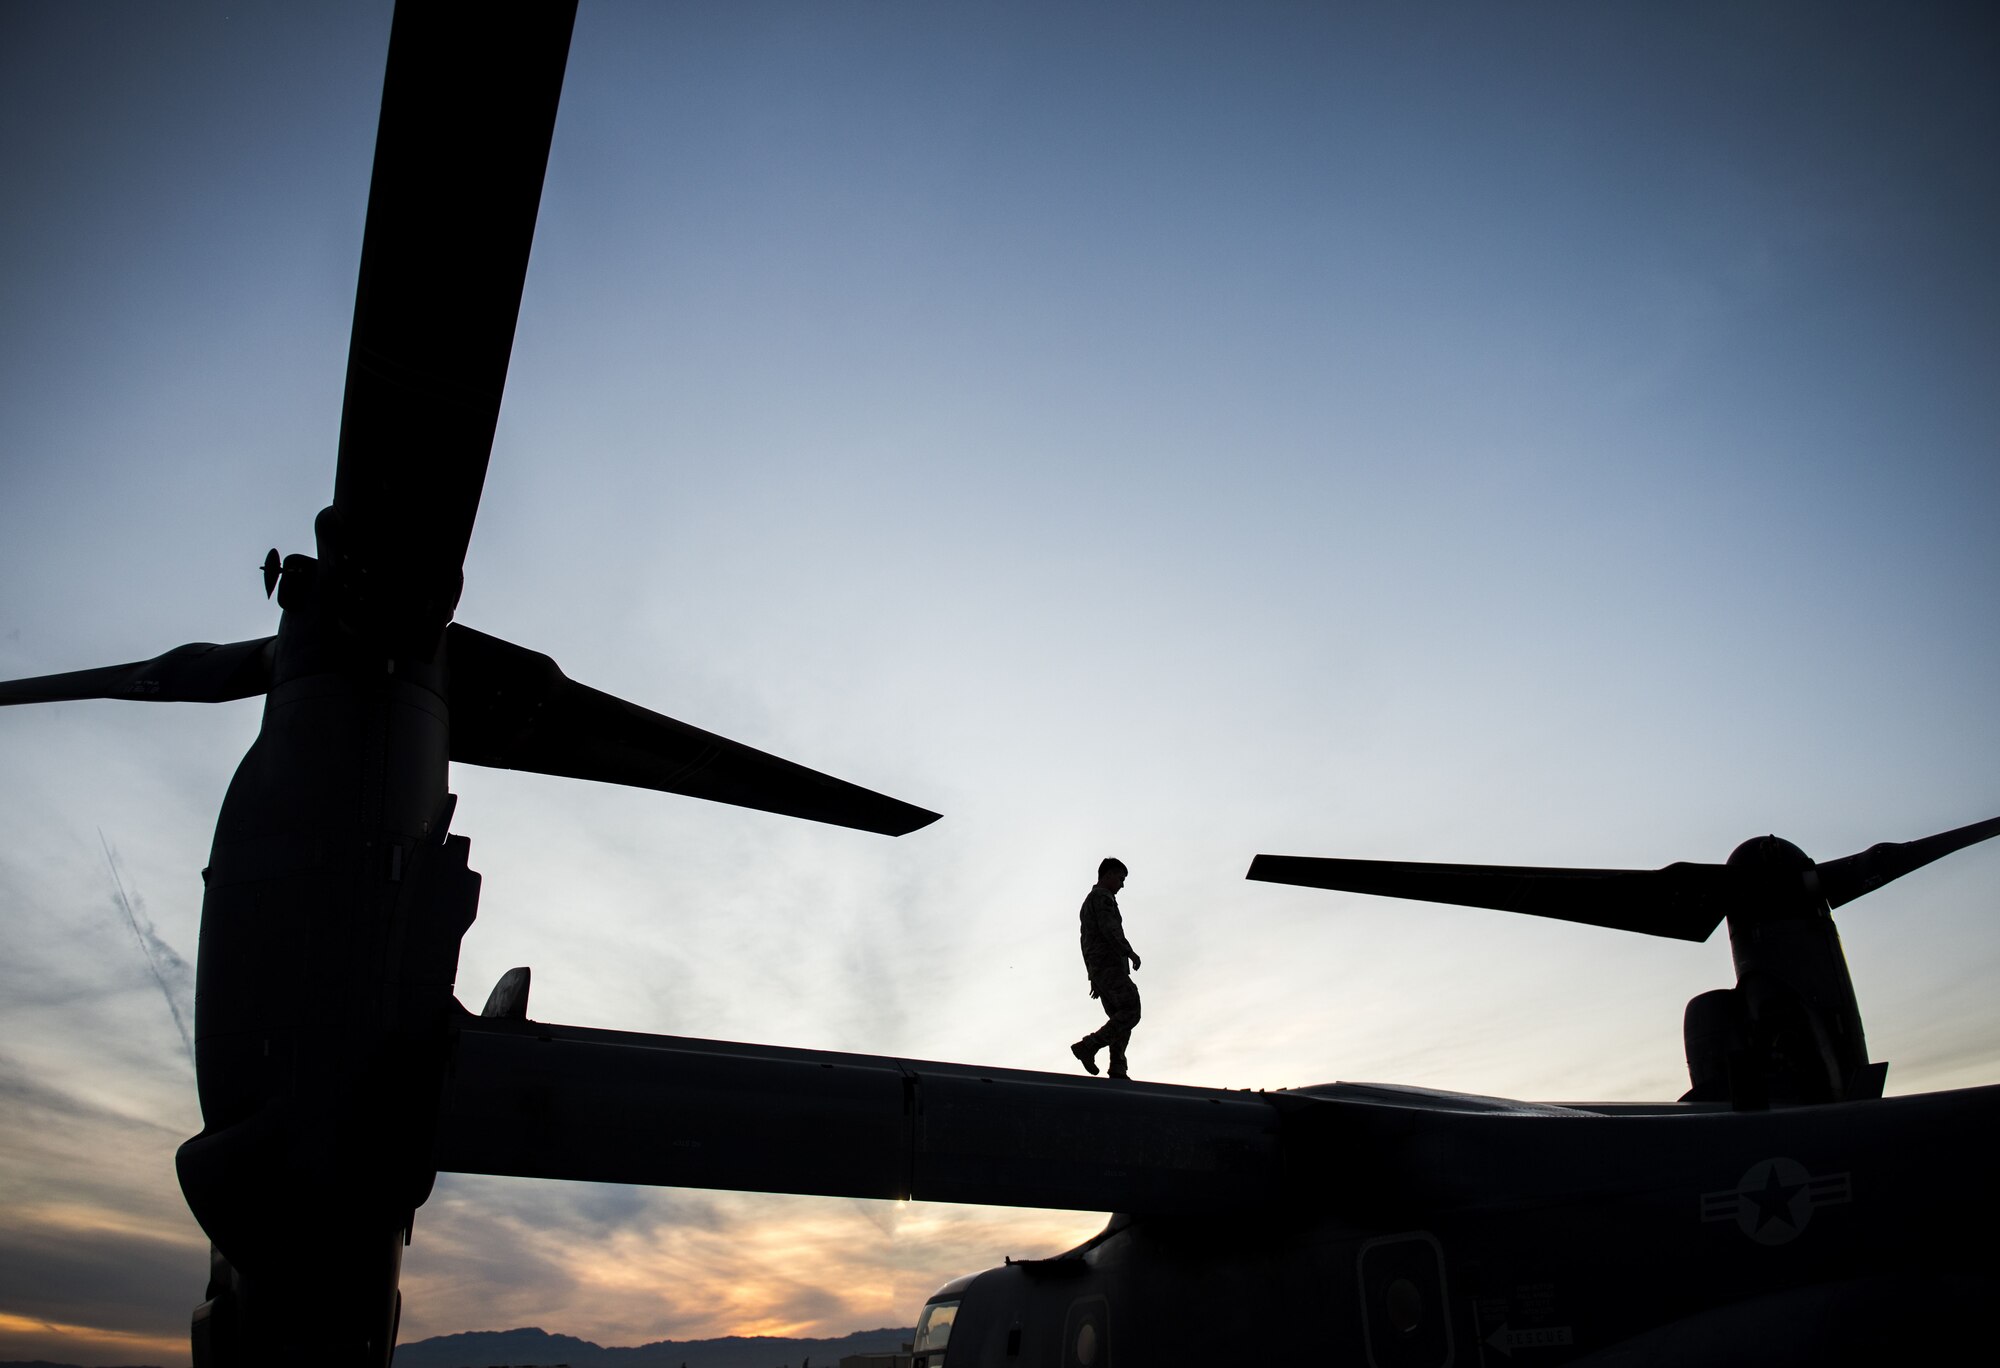 An Airman assigned to the 14th Weapons Squadron at Hurlburt Field, Florida, walks on a CV-22 Osprey helicopter prior to a training mission for the United States Air Force Weapons School (USAFWS) at Nellis Air Force Base, Nevada, Dec. 10, 2017. At the conclusion of nearly 400 hours of graduate-level academics and combat training missions, the USAFWS course climaxes with a weeklong exercise, known as Weapons School Integration. (U.S. Air Force photo by Senior Airman Kevin Tanenbaum/Released)